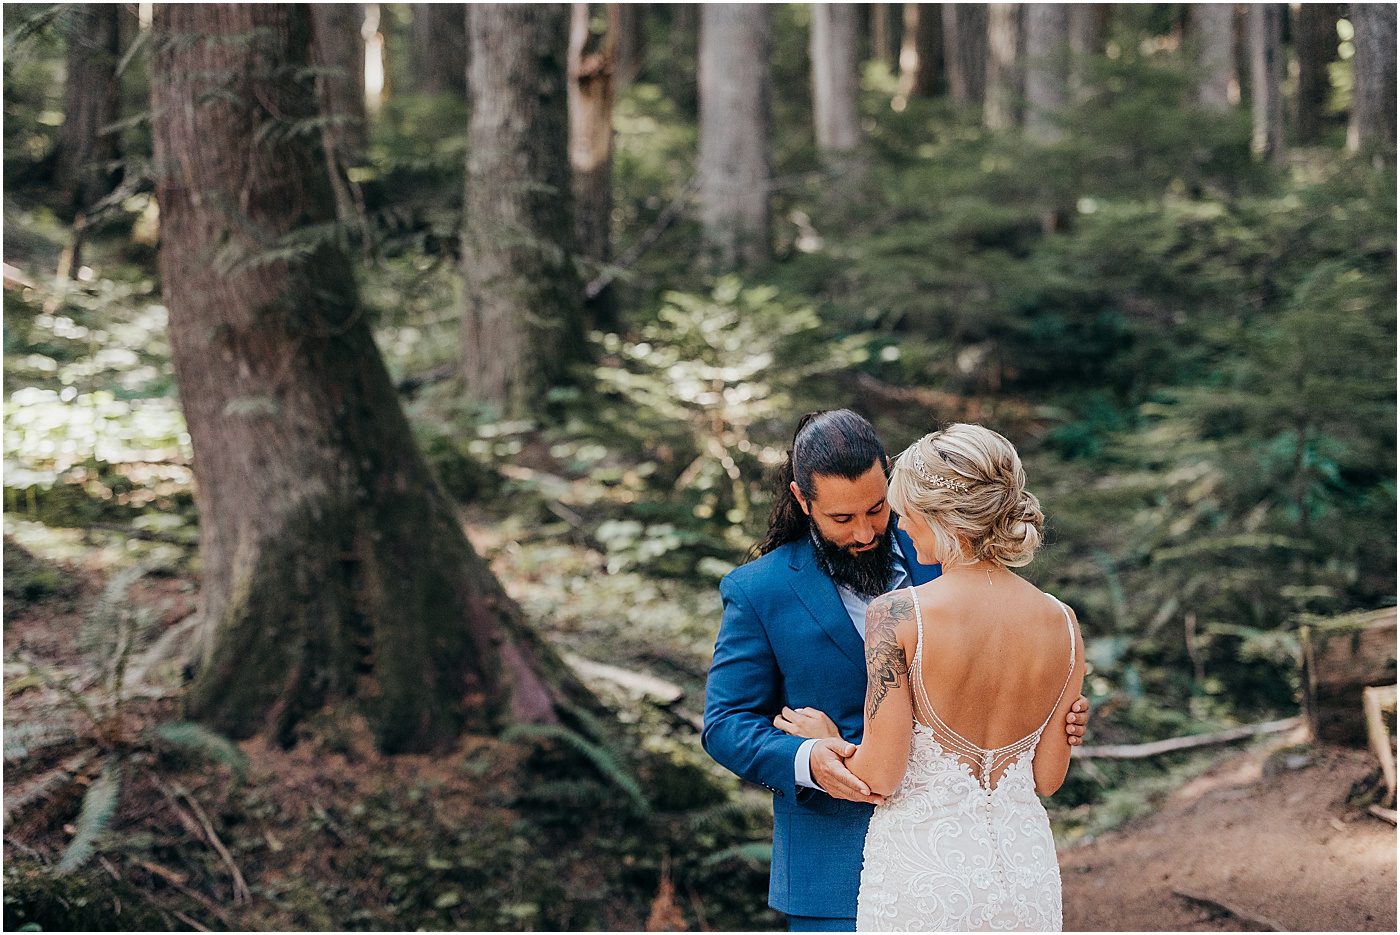 Bride and groom portraits in forest of Mount Rainier | Photo by Megan Montalvo Photography